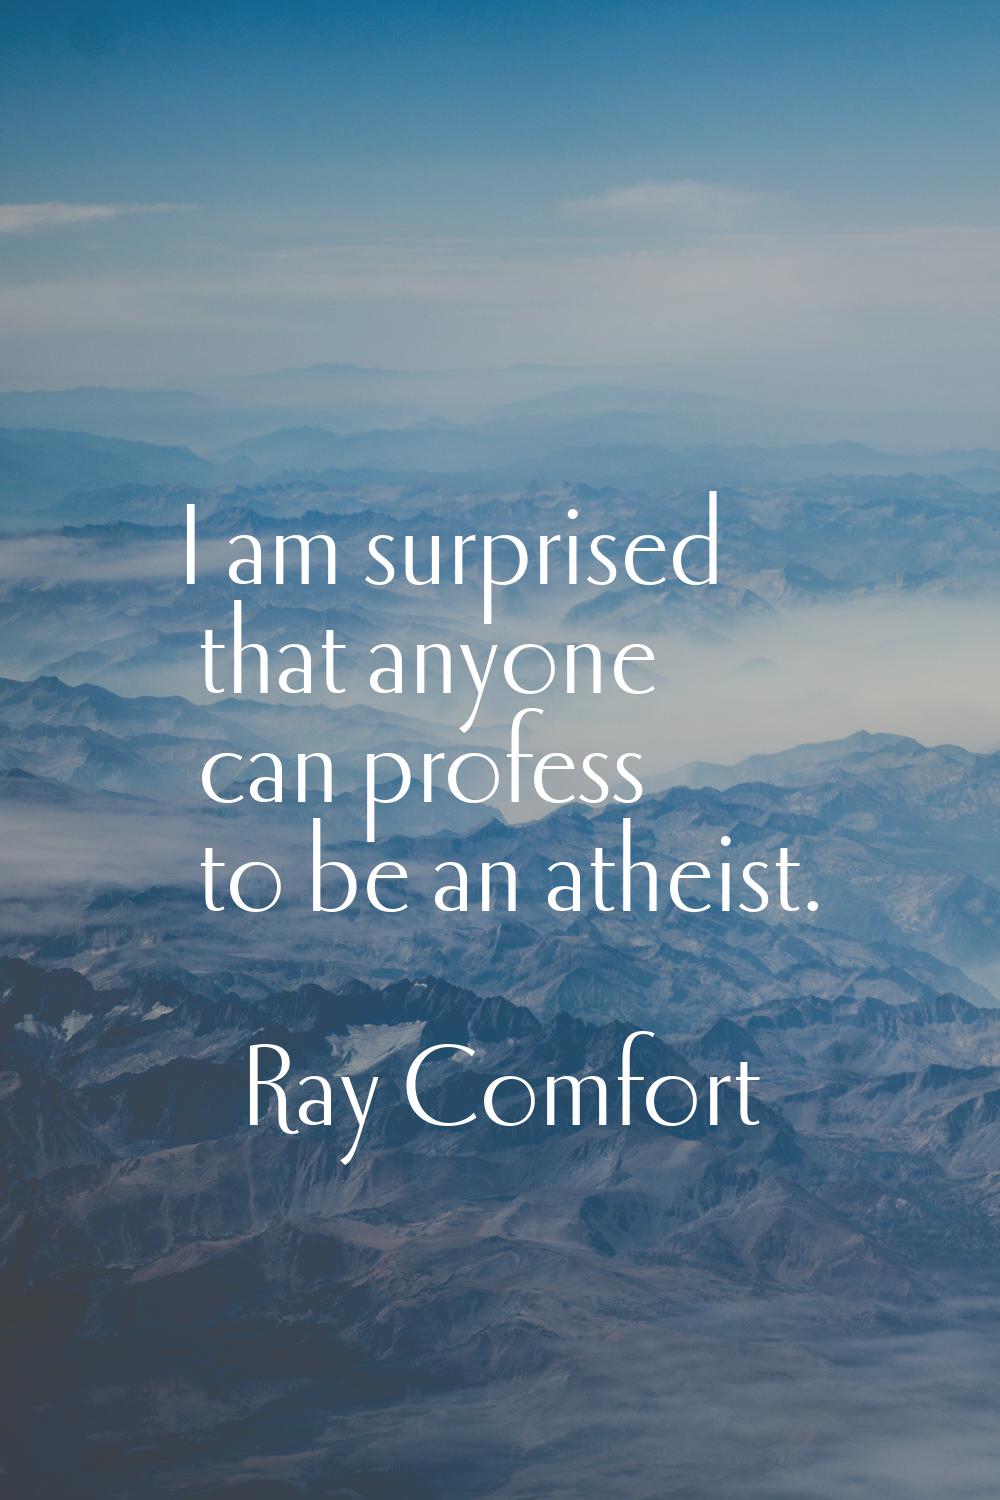 I am surprised that anyone can profess to be an atheist.